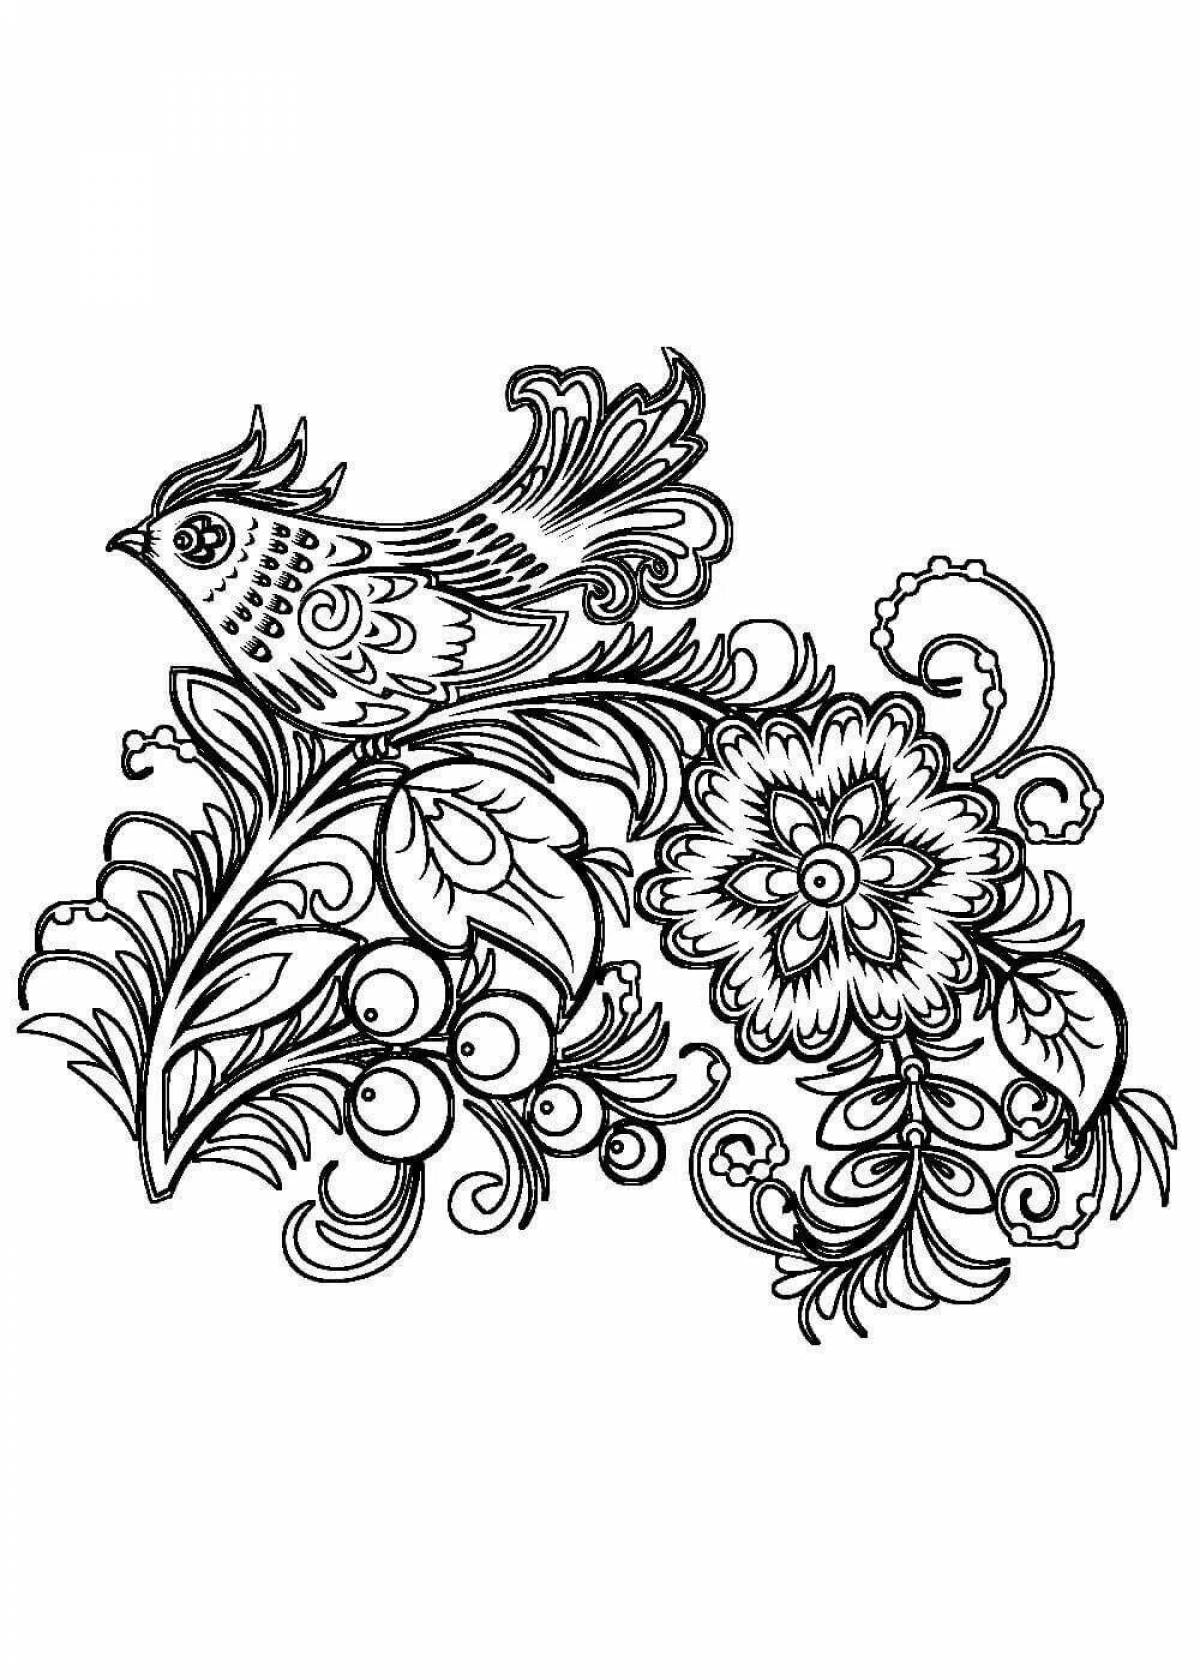 Intriguing coloring book with Russian ornaments